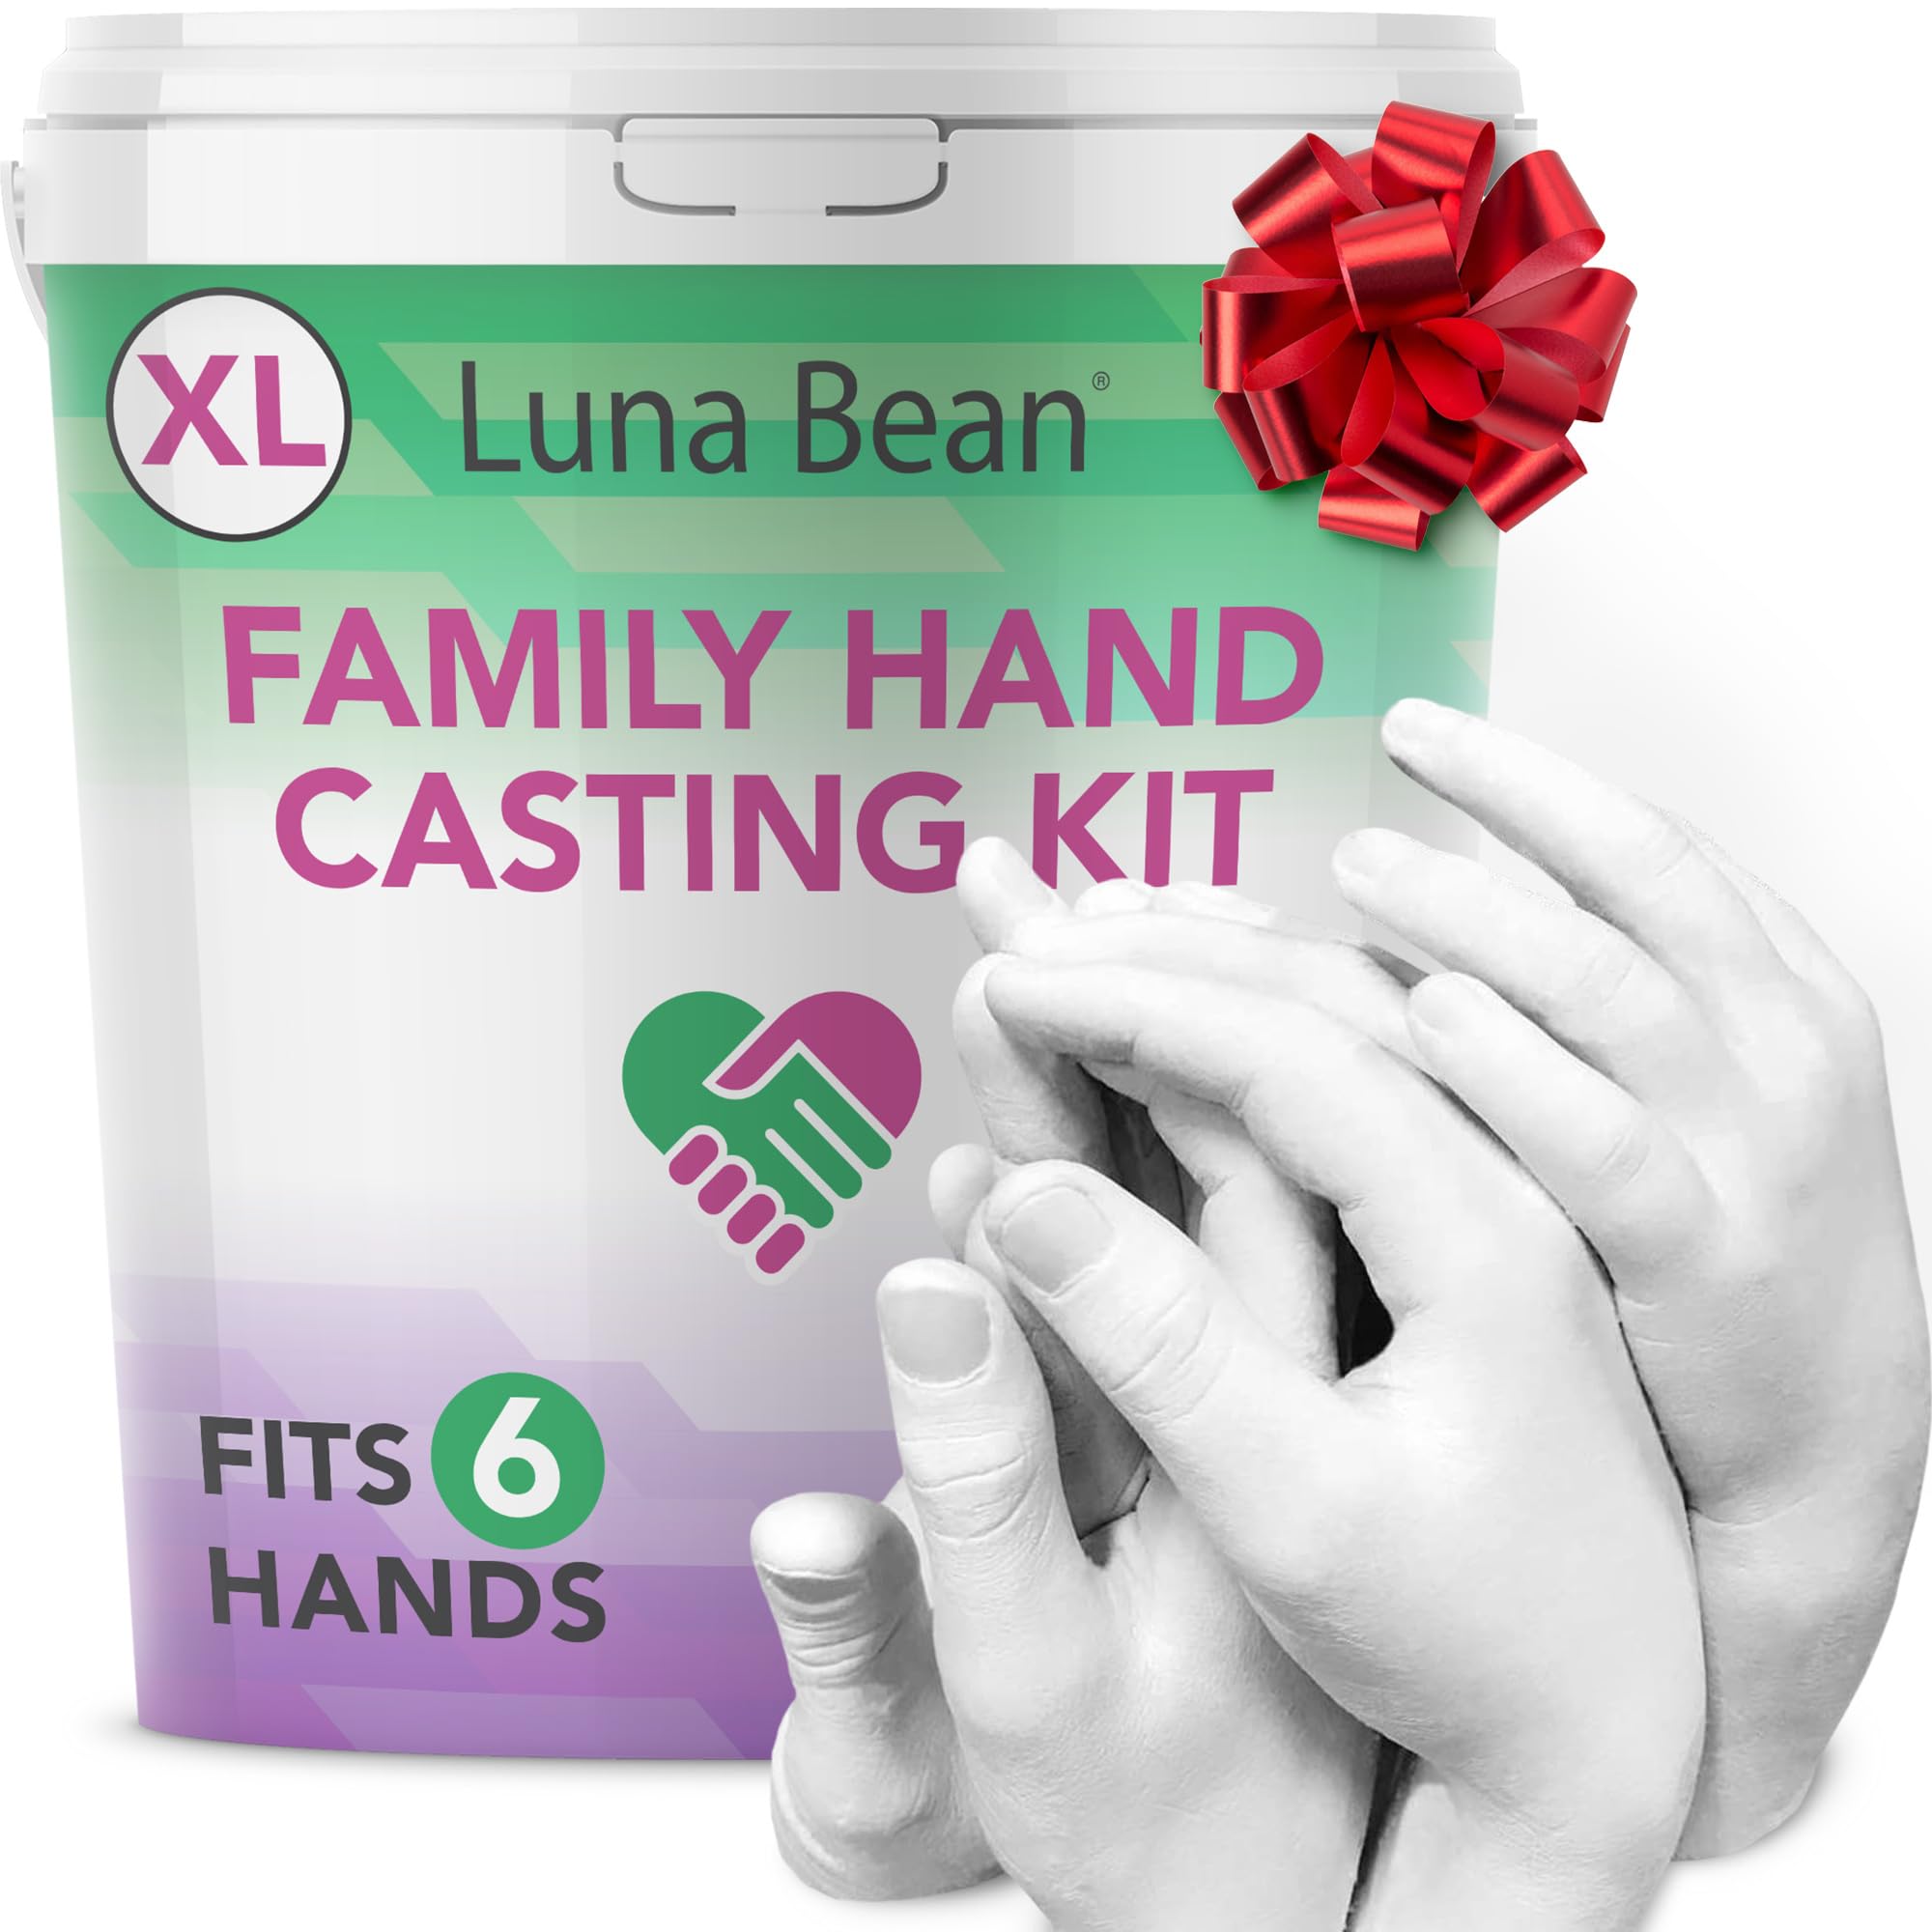 Plaster Hand Mold Casting Kit – “Happy Hands” 2 Person Plaster